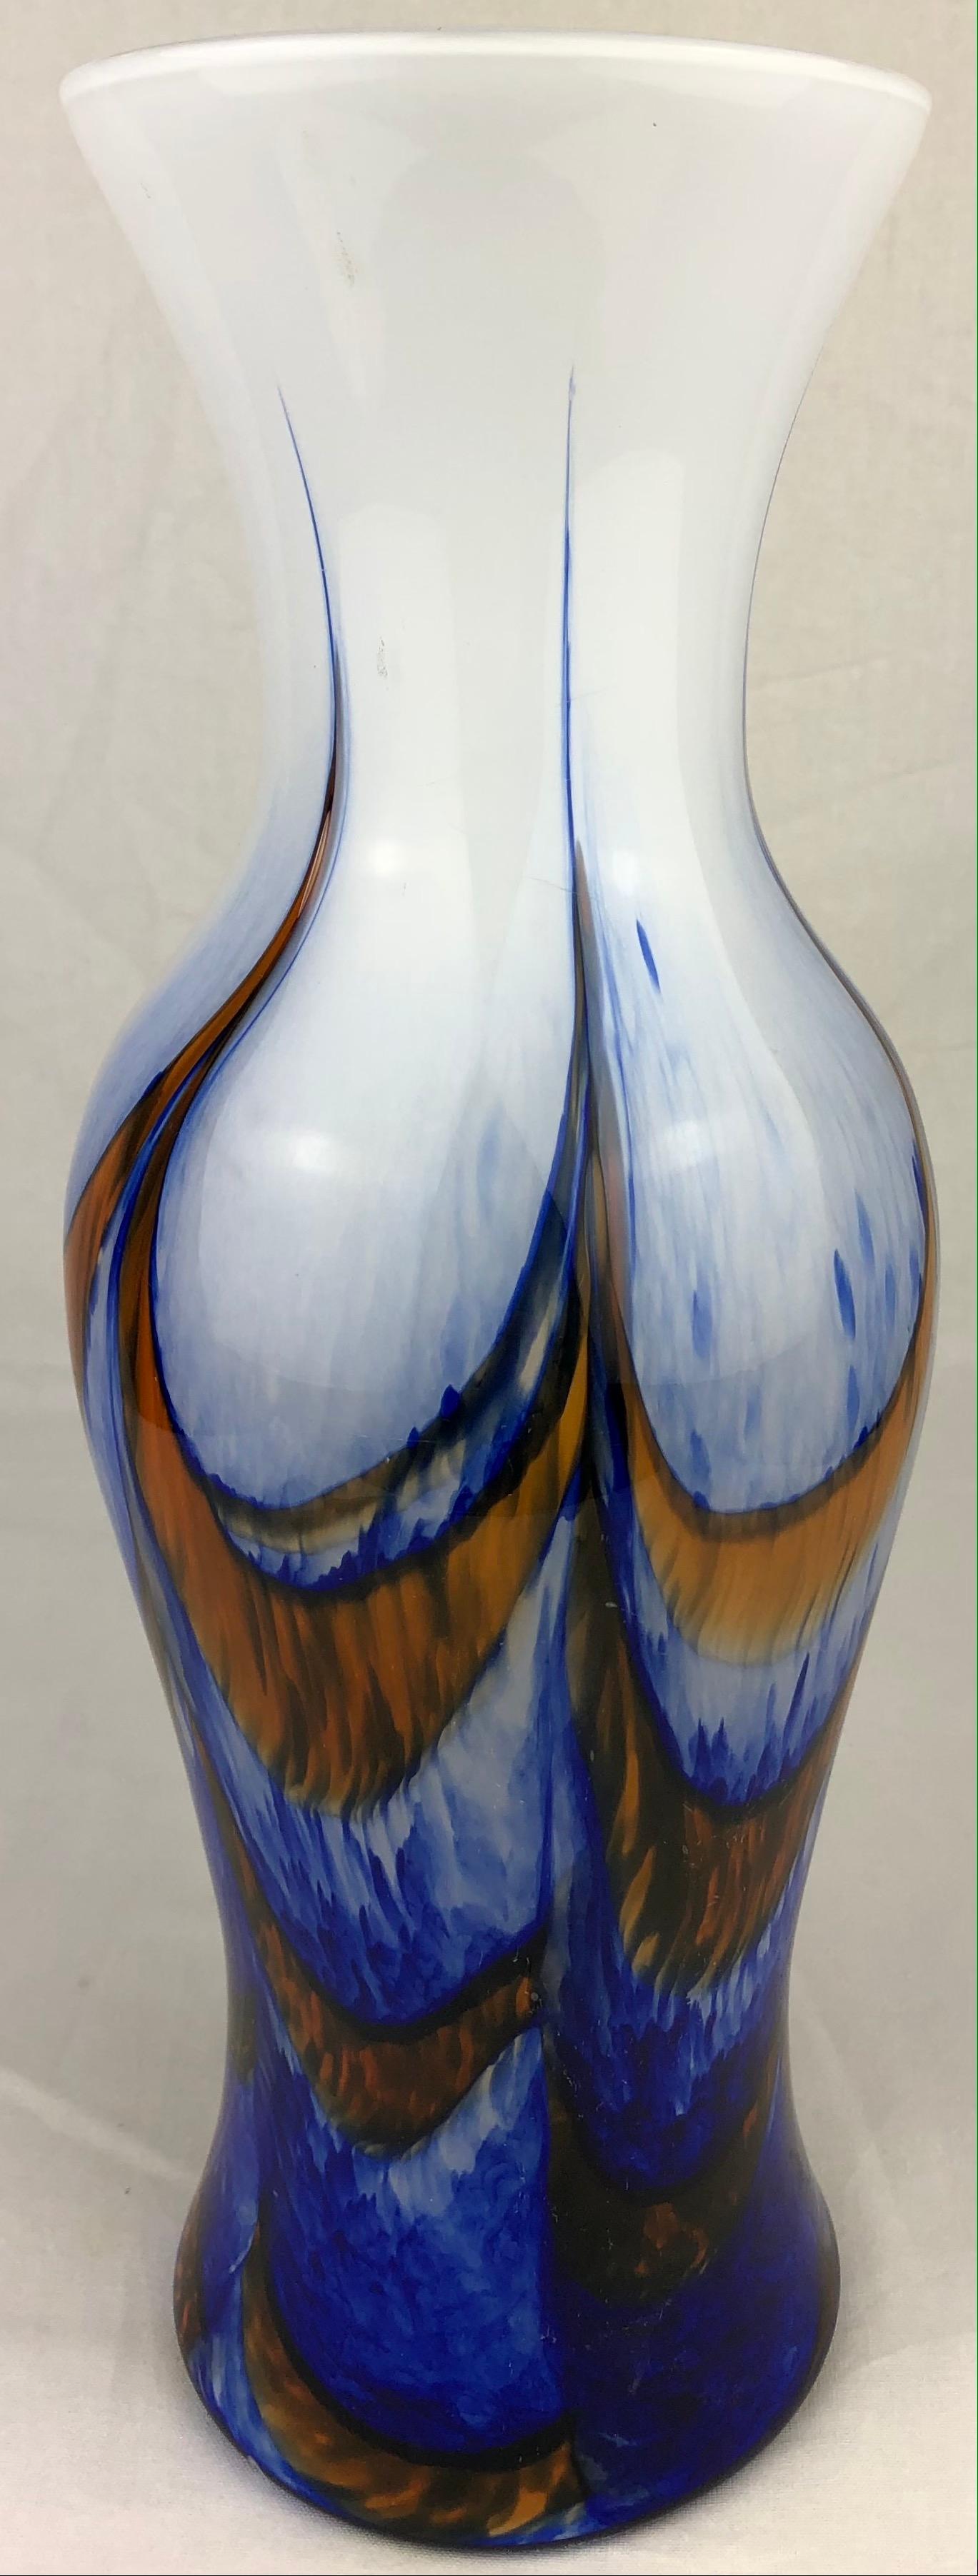 Tall French Midcentury Art Glass Vase Attributed to Schneider Glassworks In Good Condition For Sale In Miami, FL